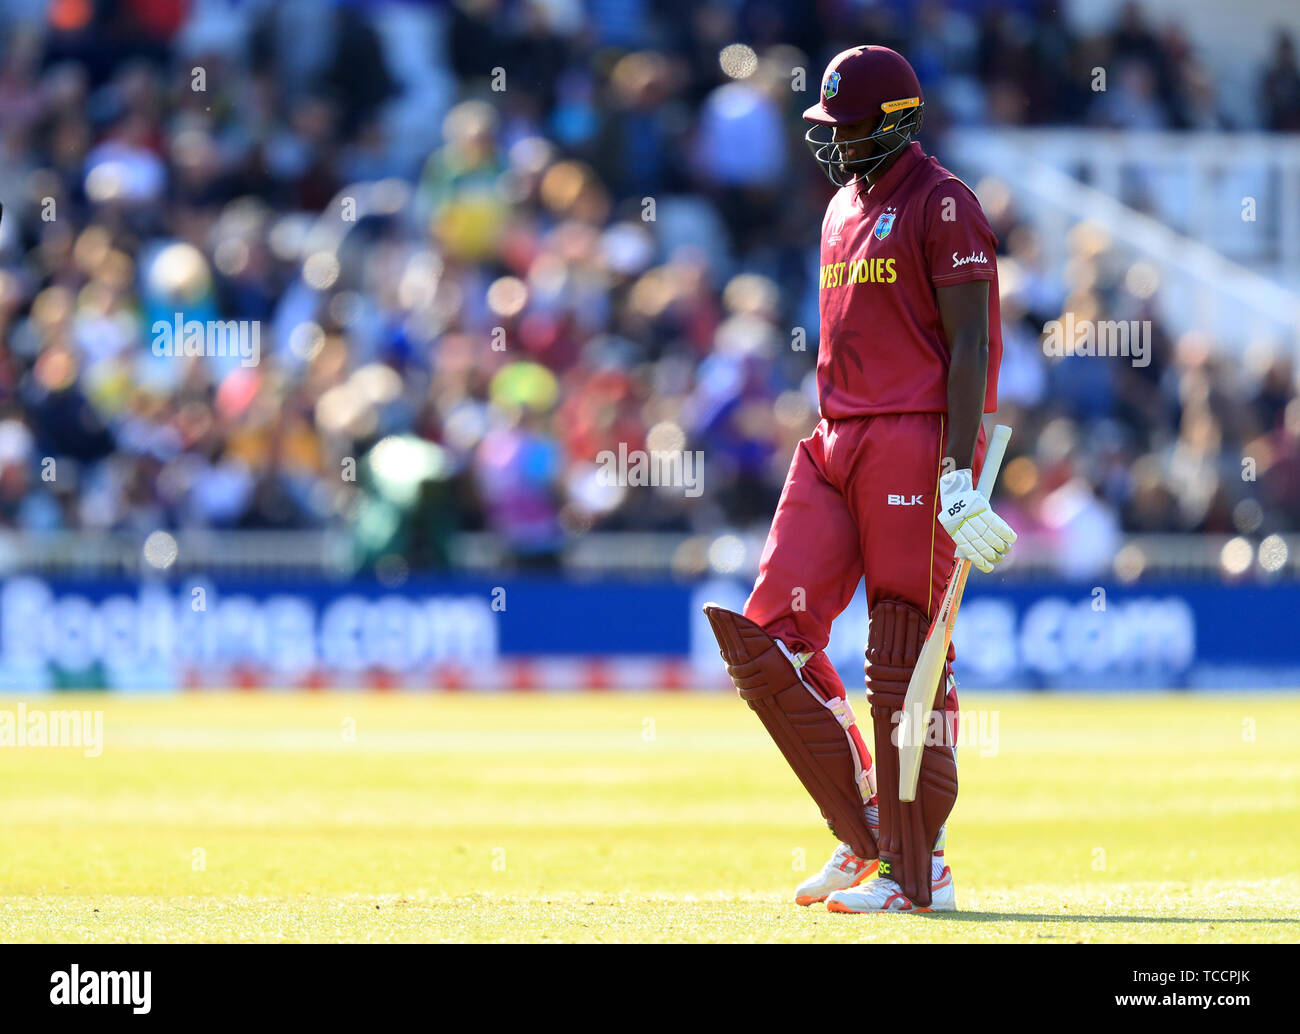 West Indies' Jason Holder walks off after being dismissed by Australia's Mitchell Starc during the ICC Cricket World Cup group stage match at Trent Bridge, Nottingham. Stock Photo